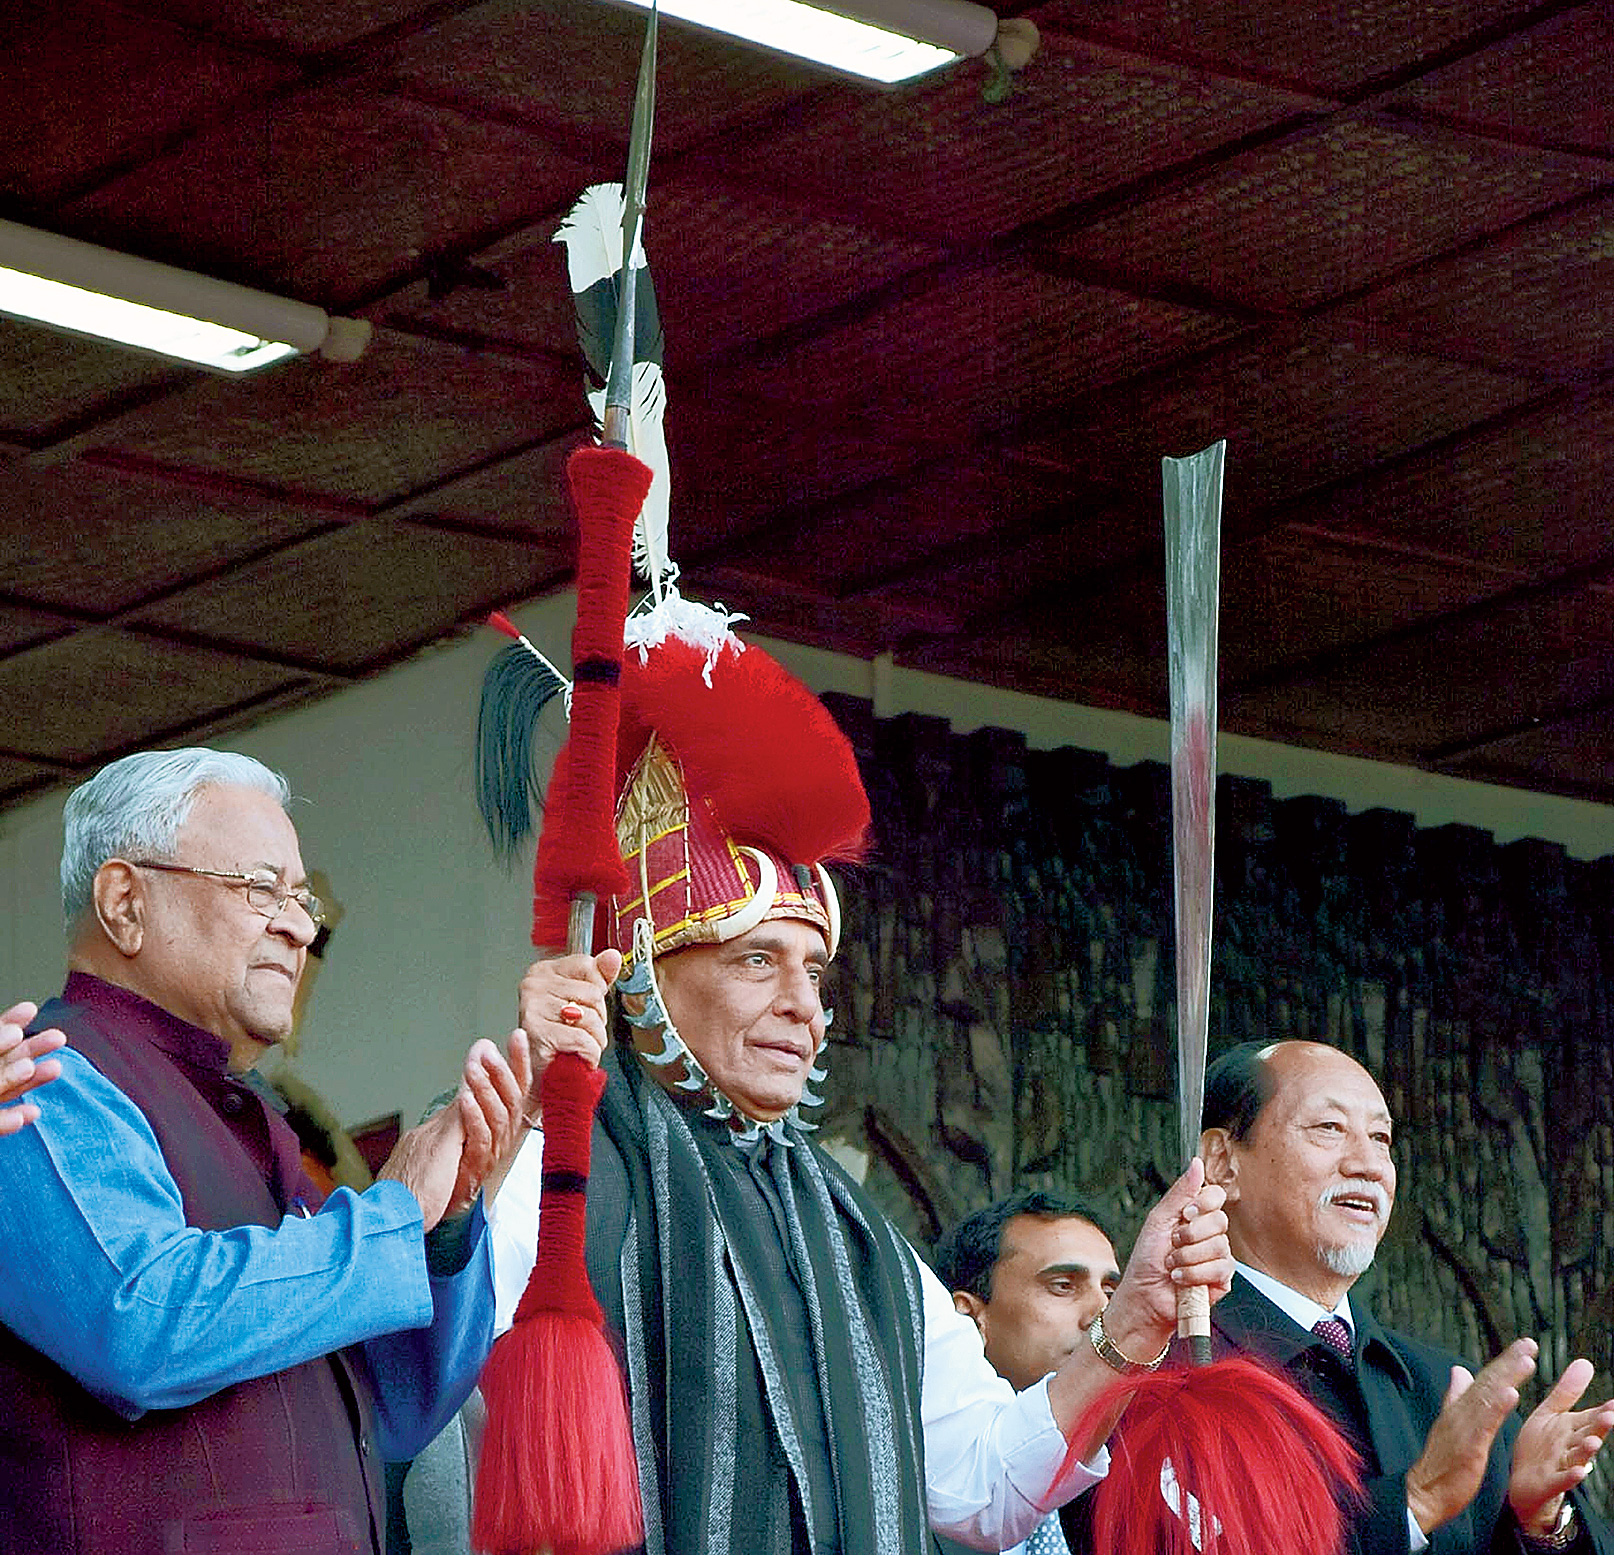 Union home minister Rajnath Singh, flanked by Nagaland governor P.B. Acharya and chief minister Neiphiu Rio, at the Hornbill Festival in Kisama village in Nagaland on Saturday.